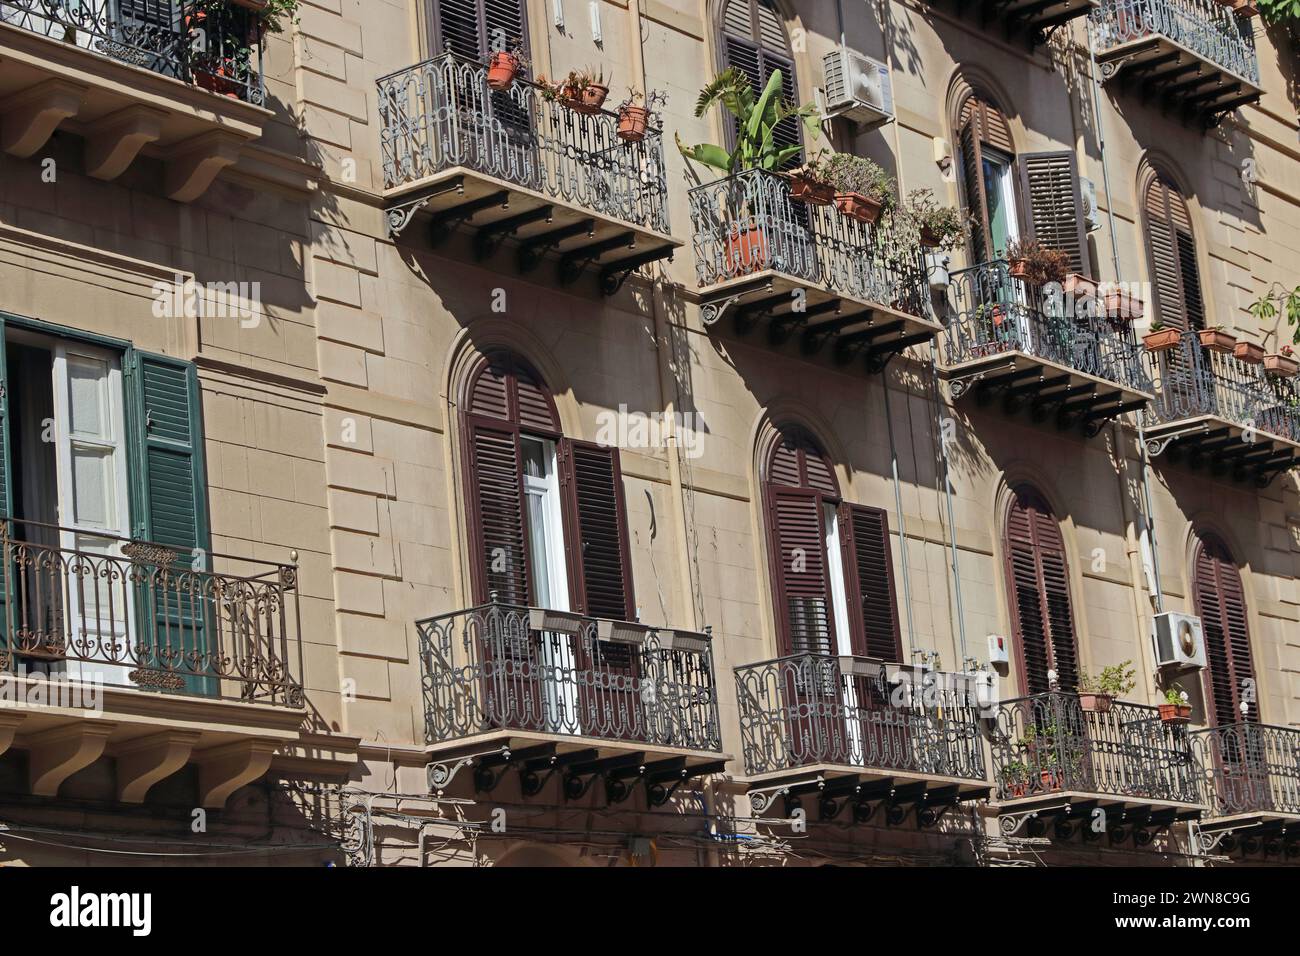 Traditional block of house with balconies and metal railings, Palermo, Sicily Stock Photo